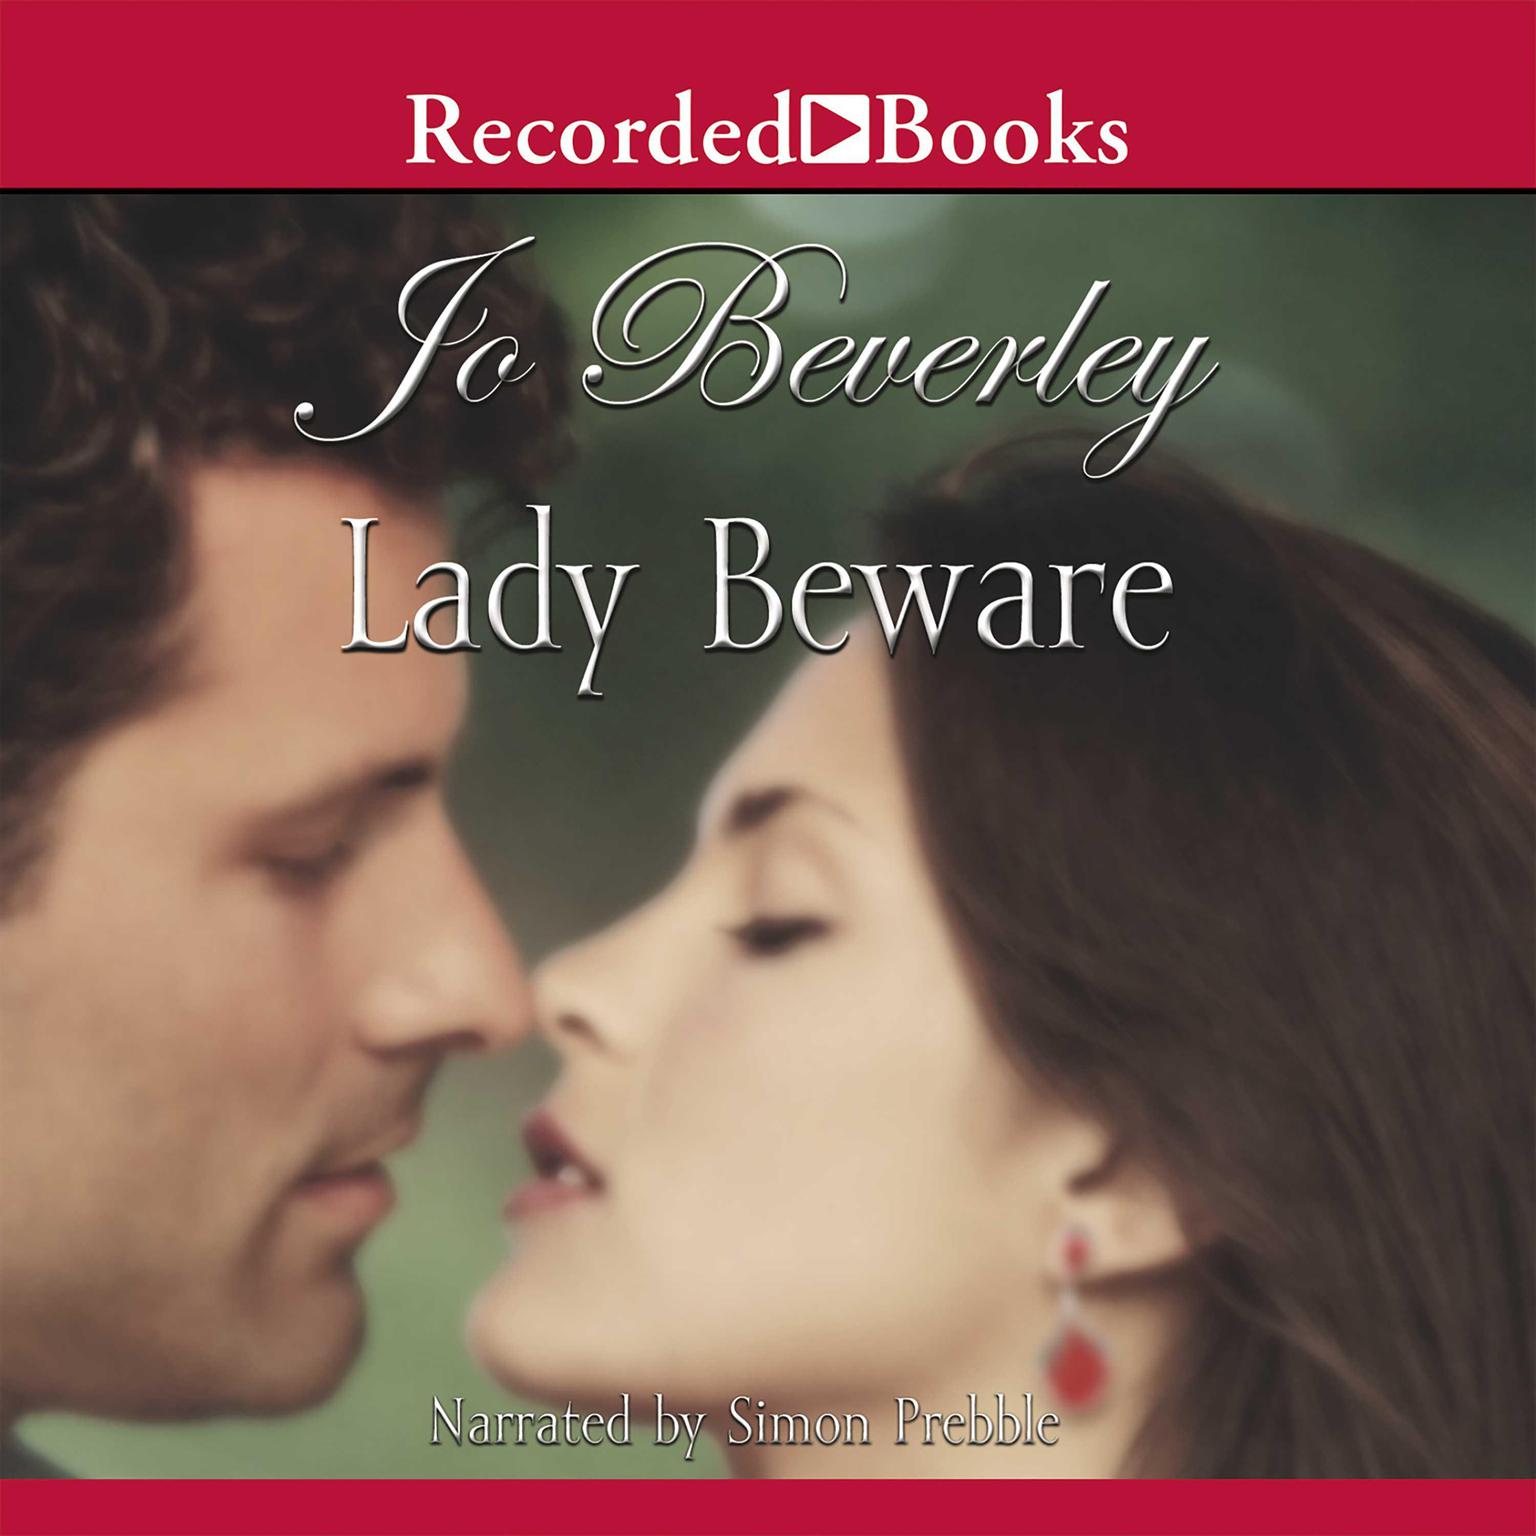 Lady Beware: A Novel of the Company of Rogues Audiobook, by Jo Beverley